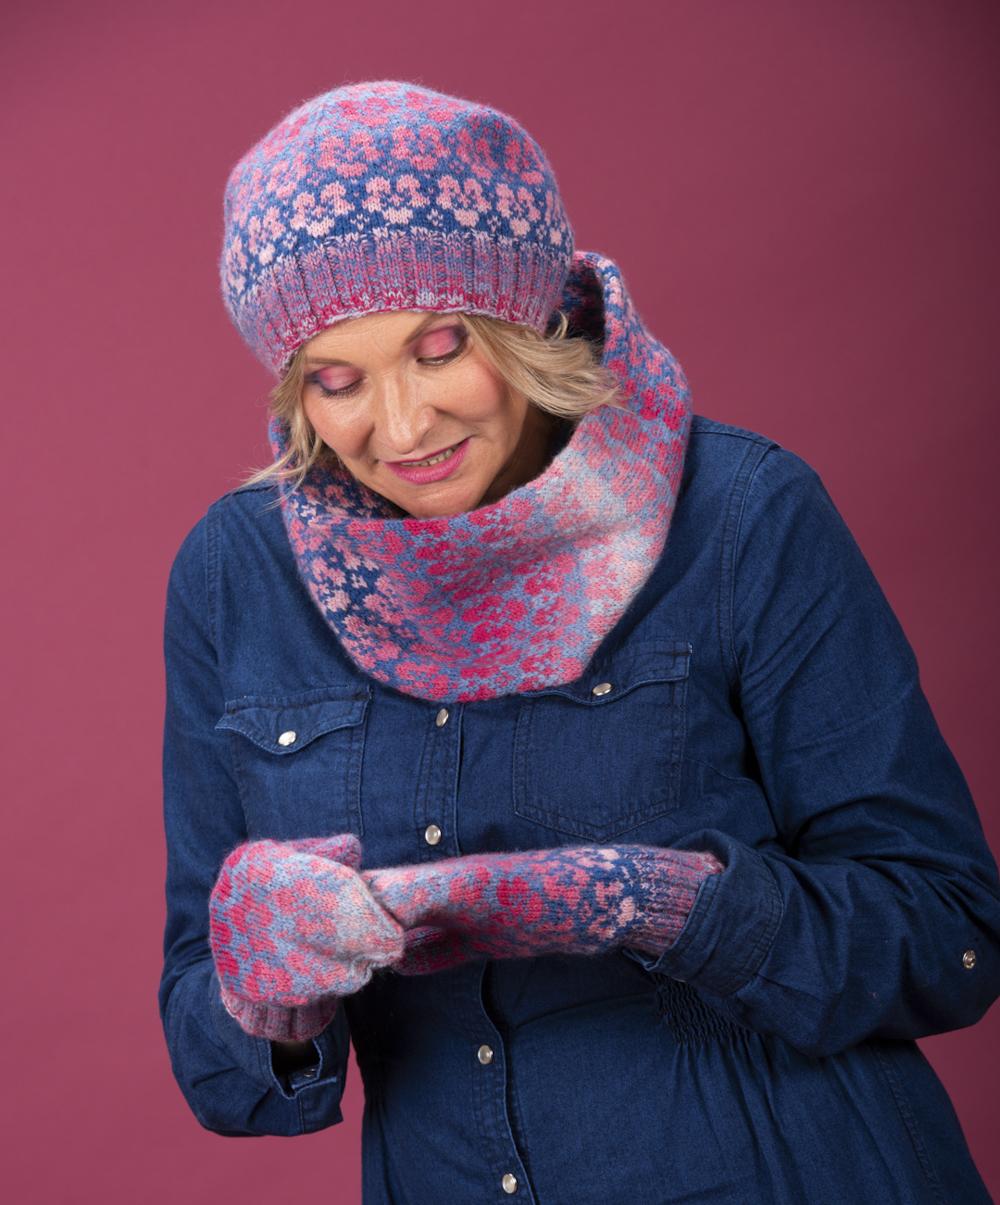 Heidi examines the pattern on one of the Flombre mittens; she wears the matching pink and blue accessories and a dark blue denim dress; the background is pink